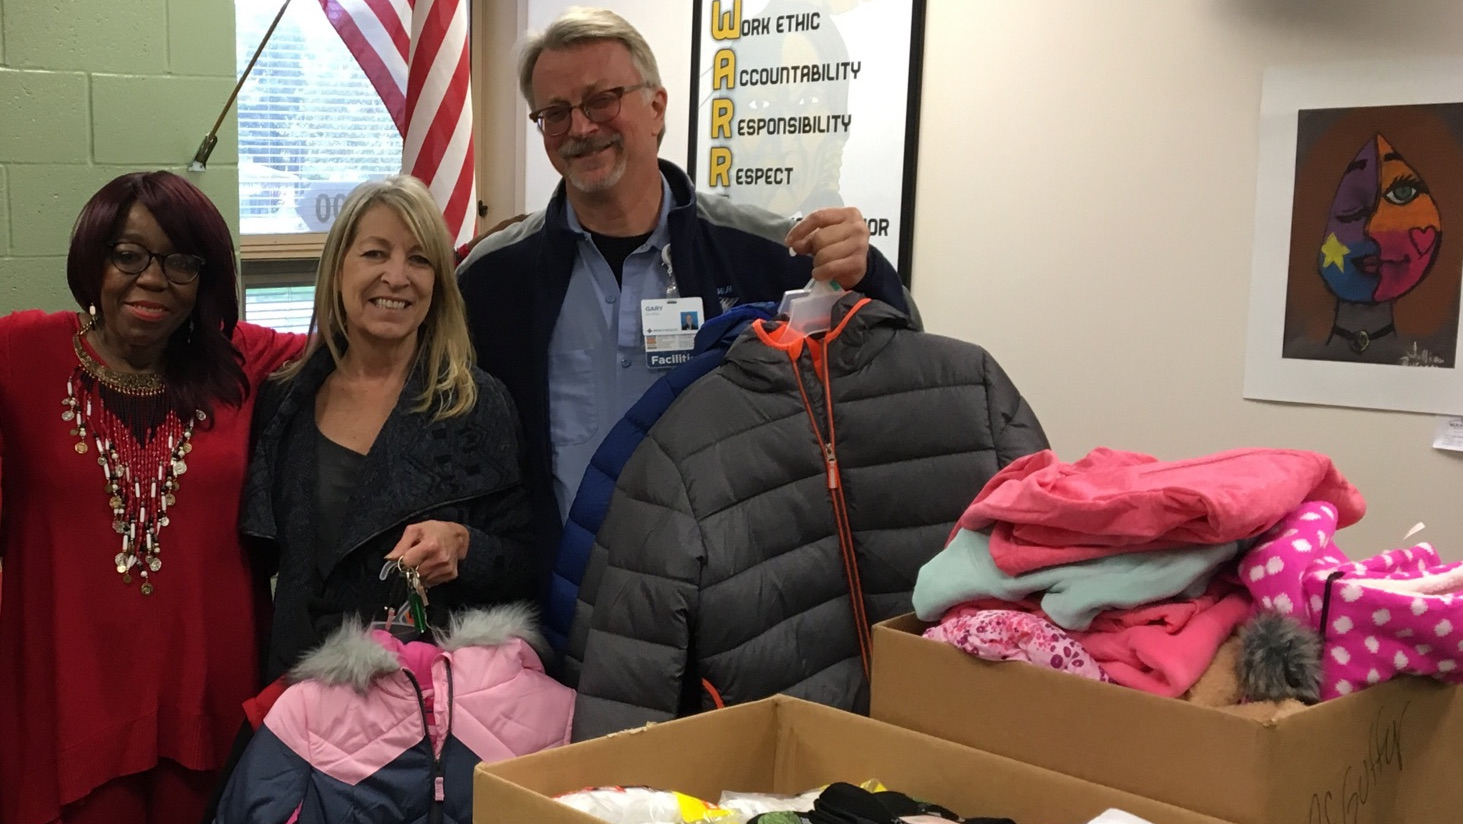 Remove term: A big thank you goes out to St. Joe's Hospital who kindly donated clothing to the students of McGuffey! A big thank you goes out to St. Joe's Hospital who kindly donated clothing to the students of McGuffey!